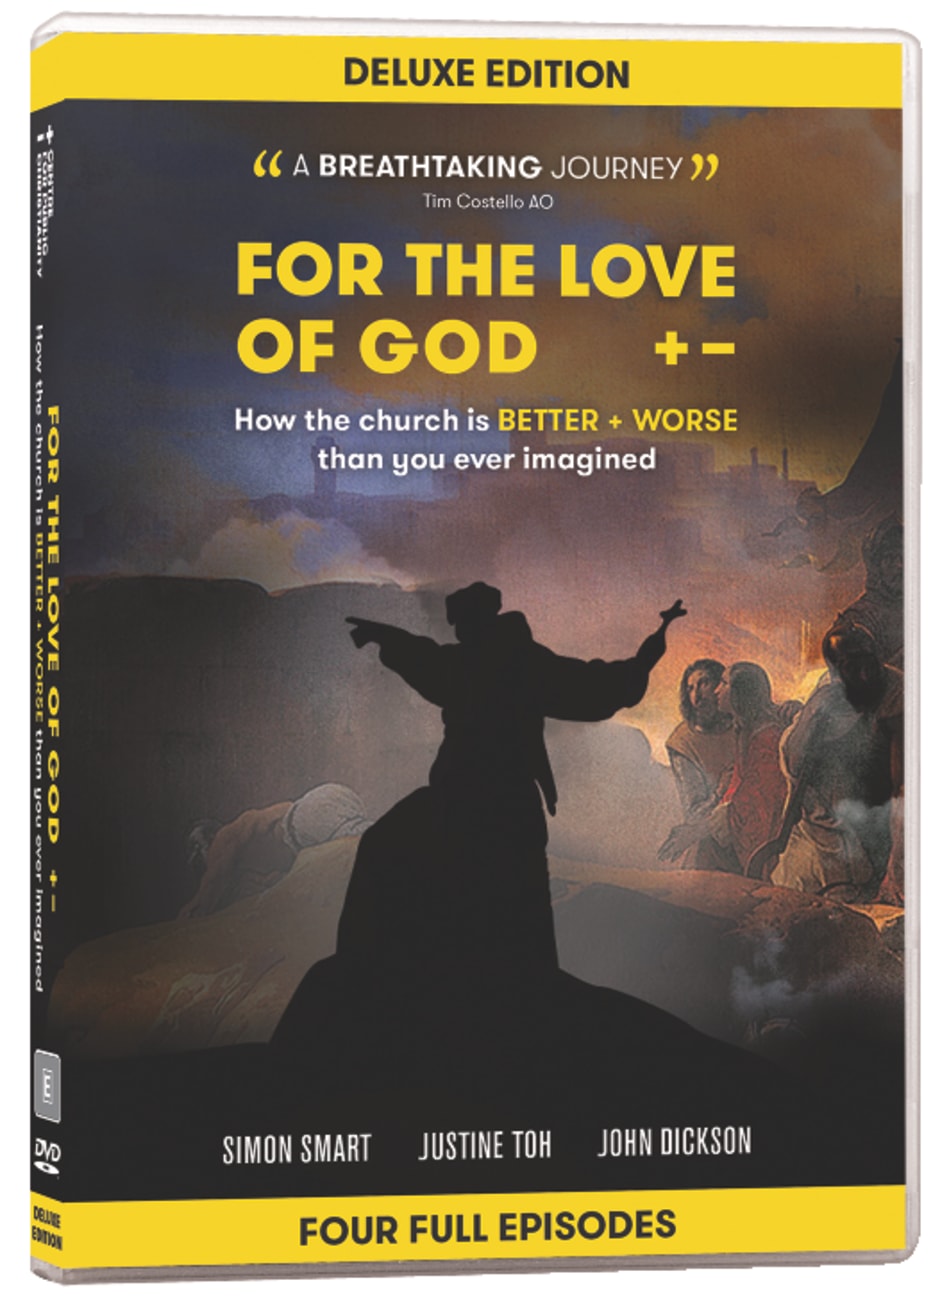 For the Love of God Deluxe Edition (2 Dvds) DVD